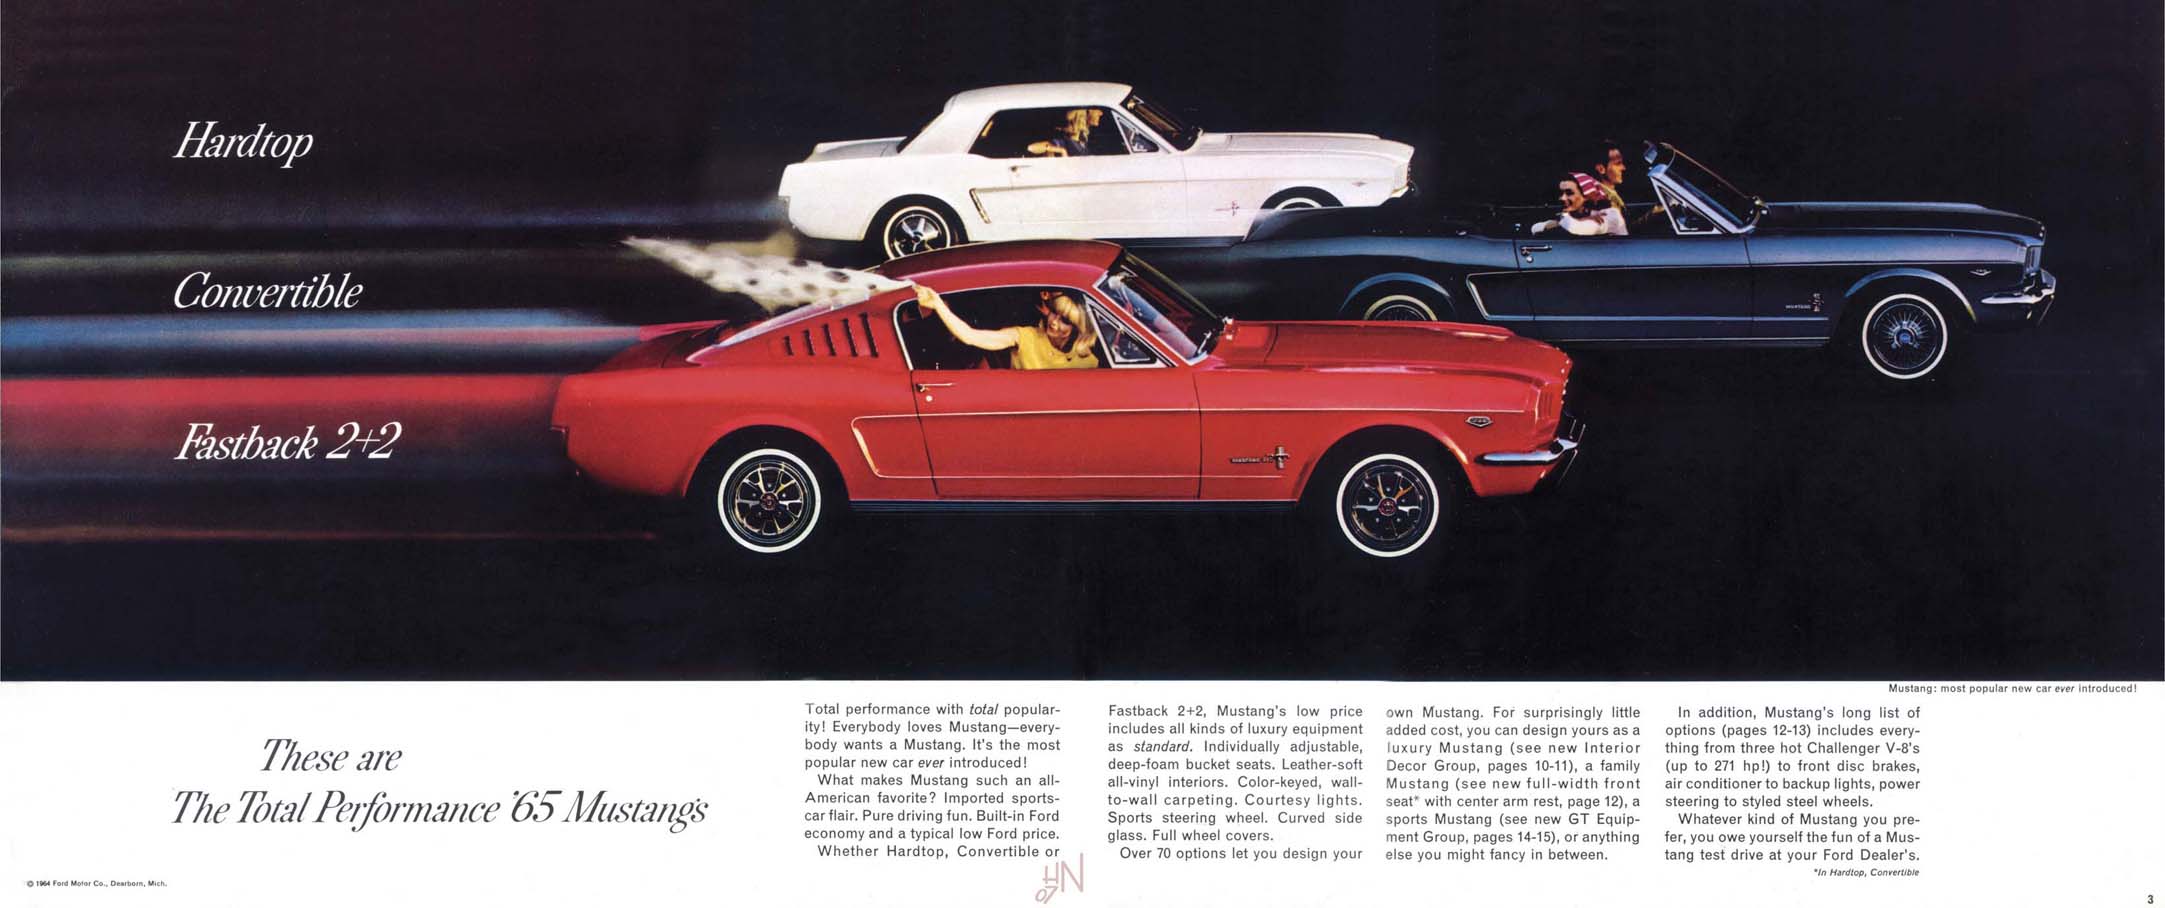 1965 Ford Mustang-02-03